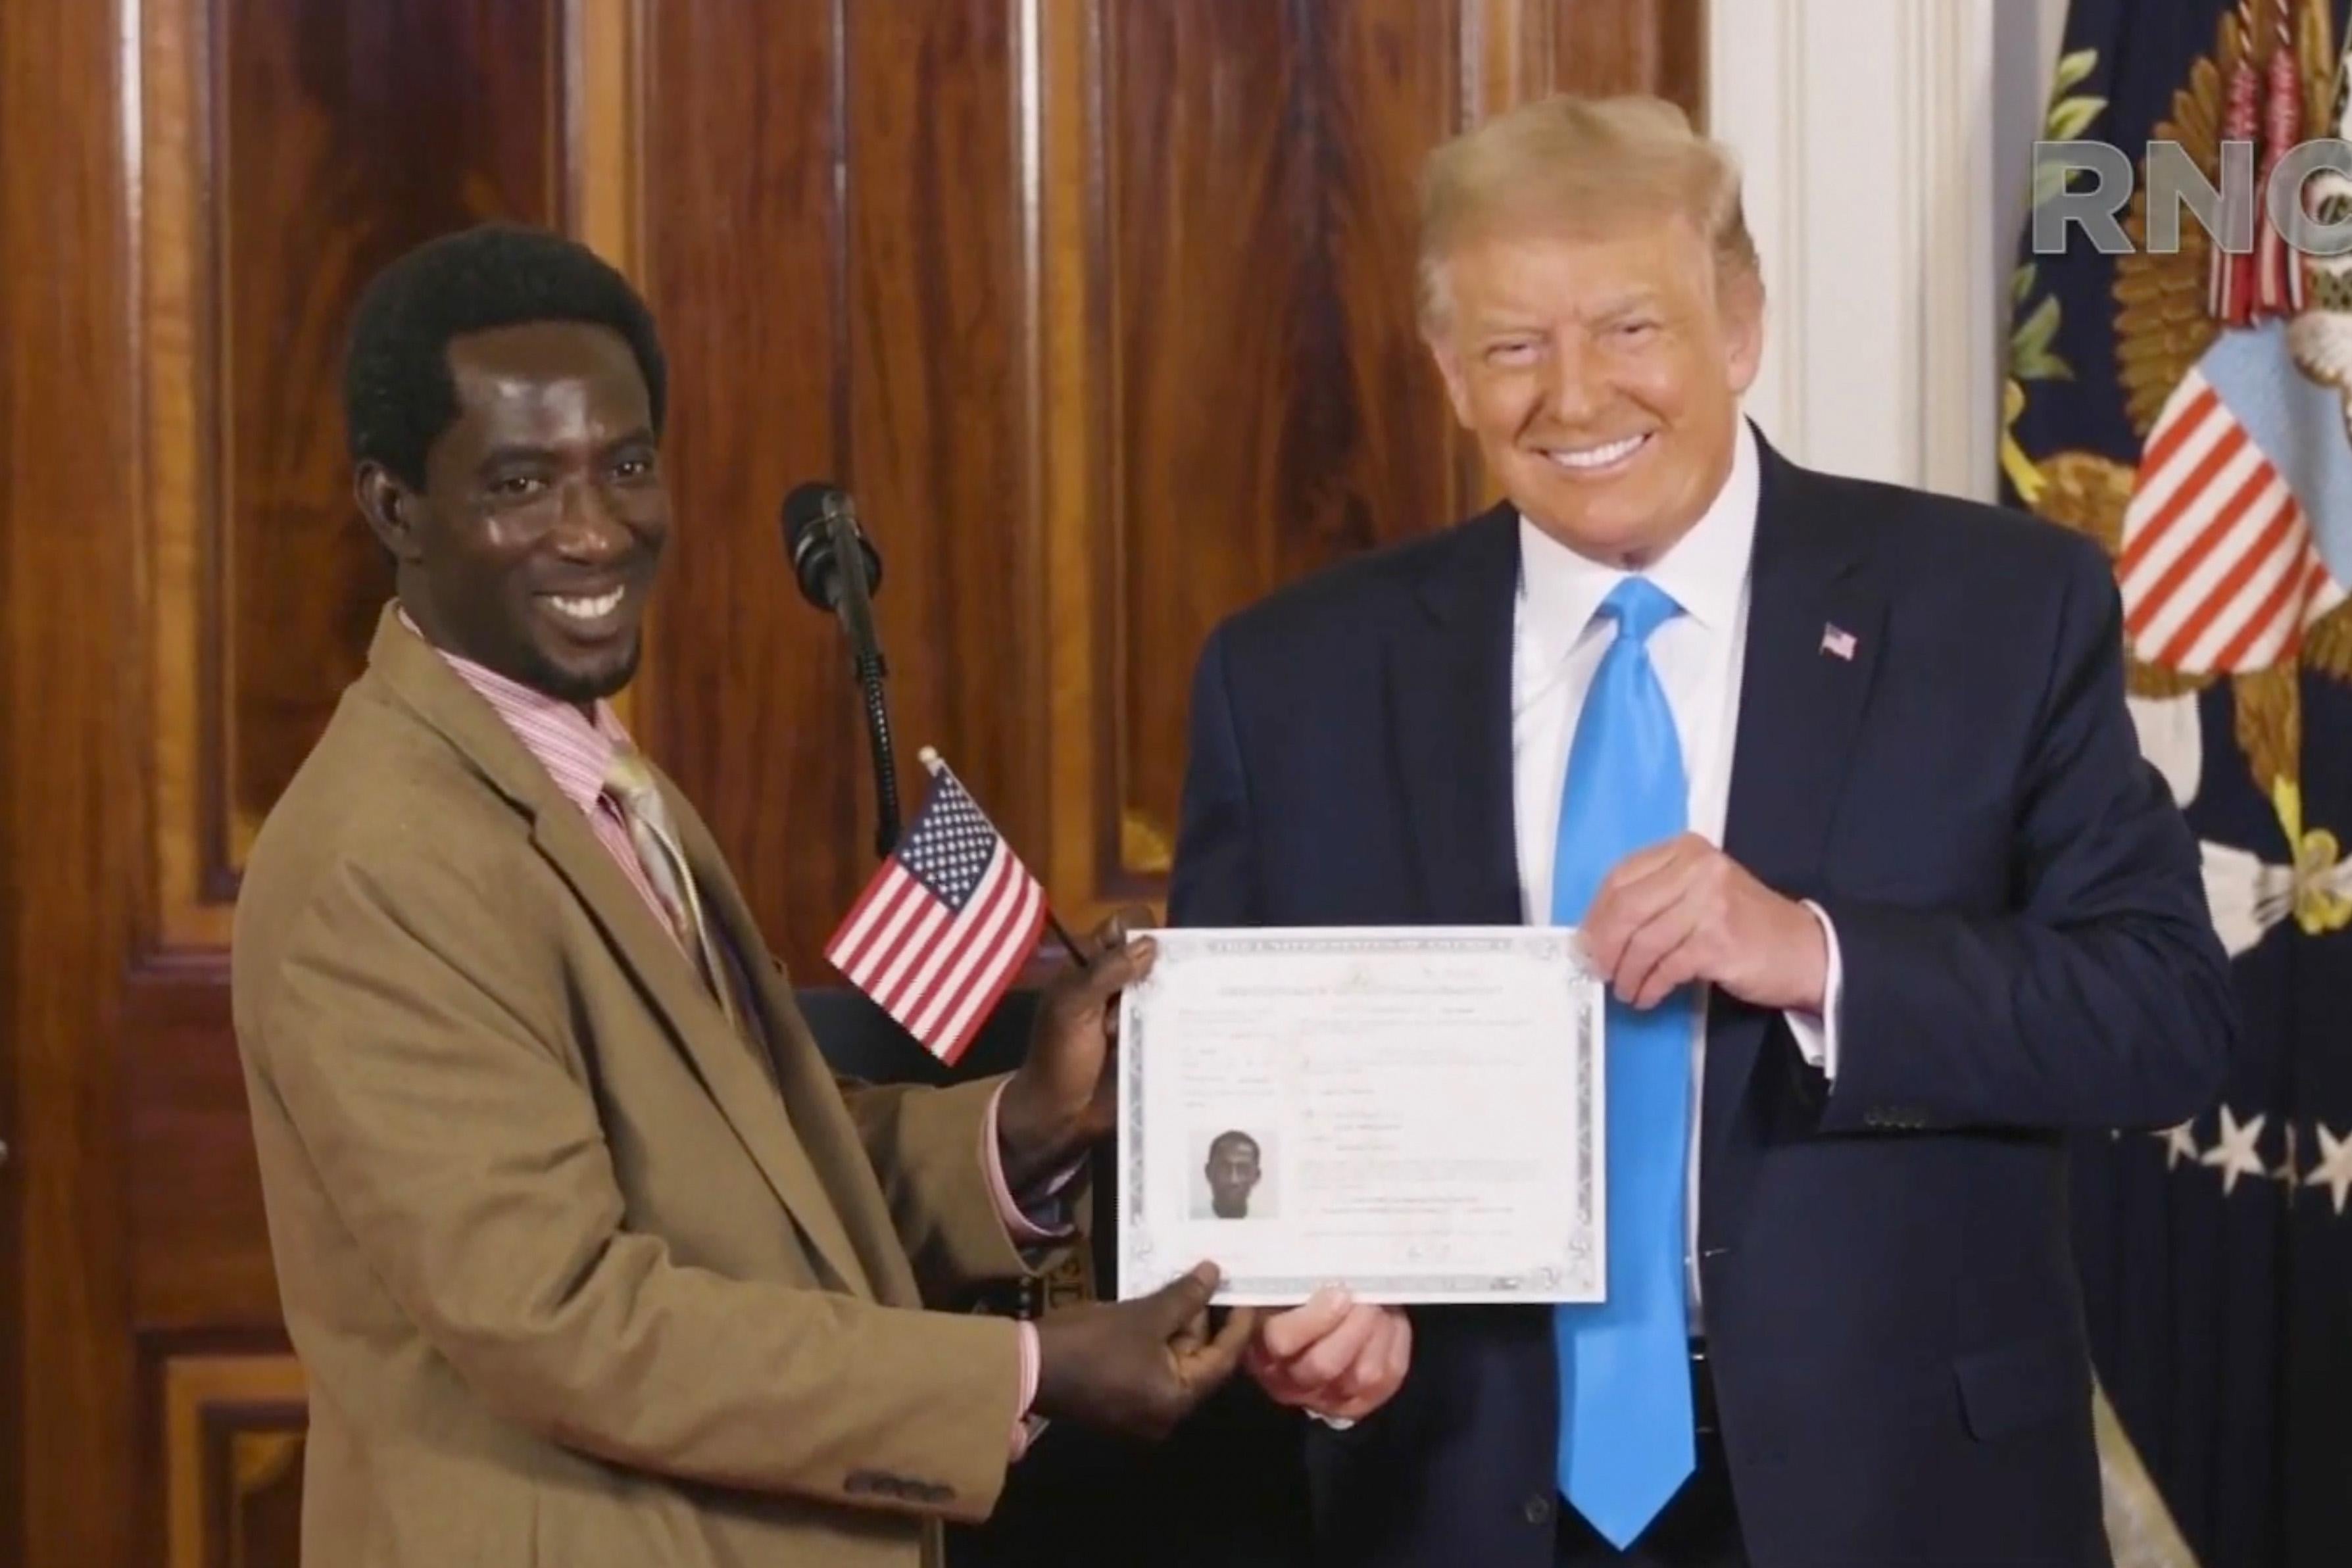 Donald Trump holds a certificate with an American flag alongside a newly inaugurated citizen.